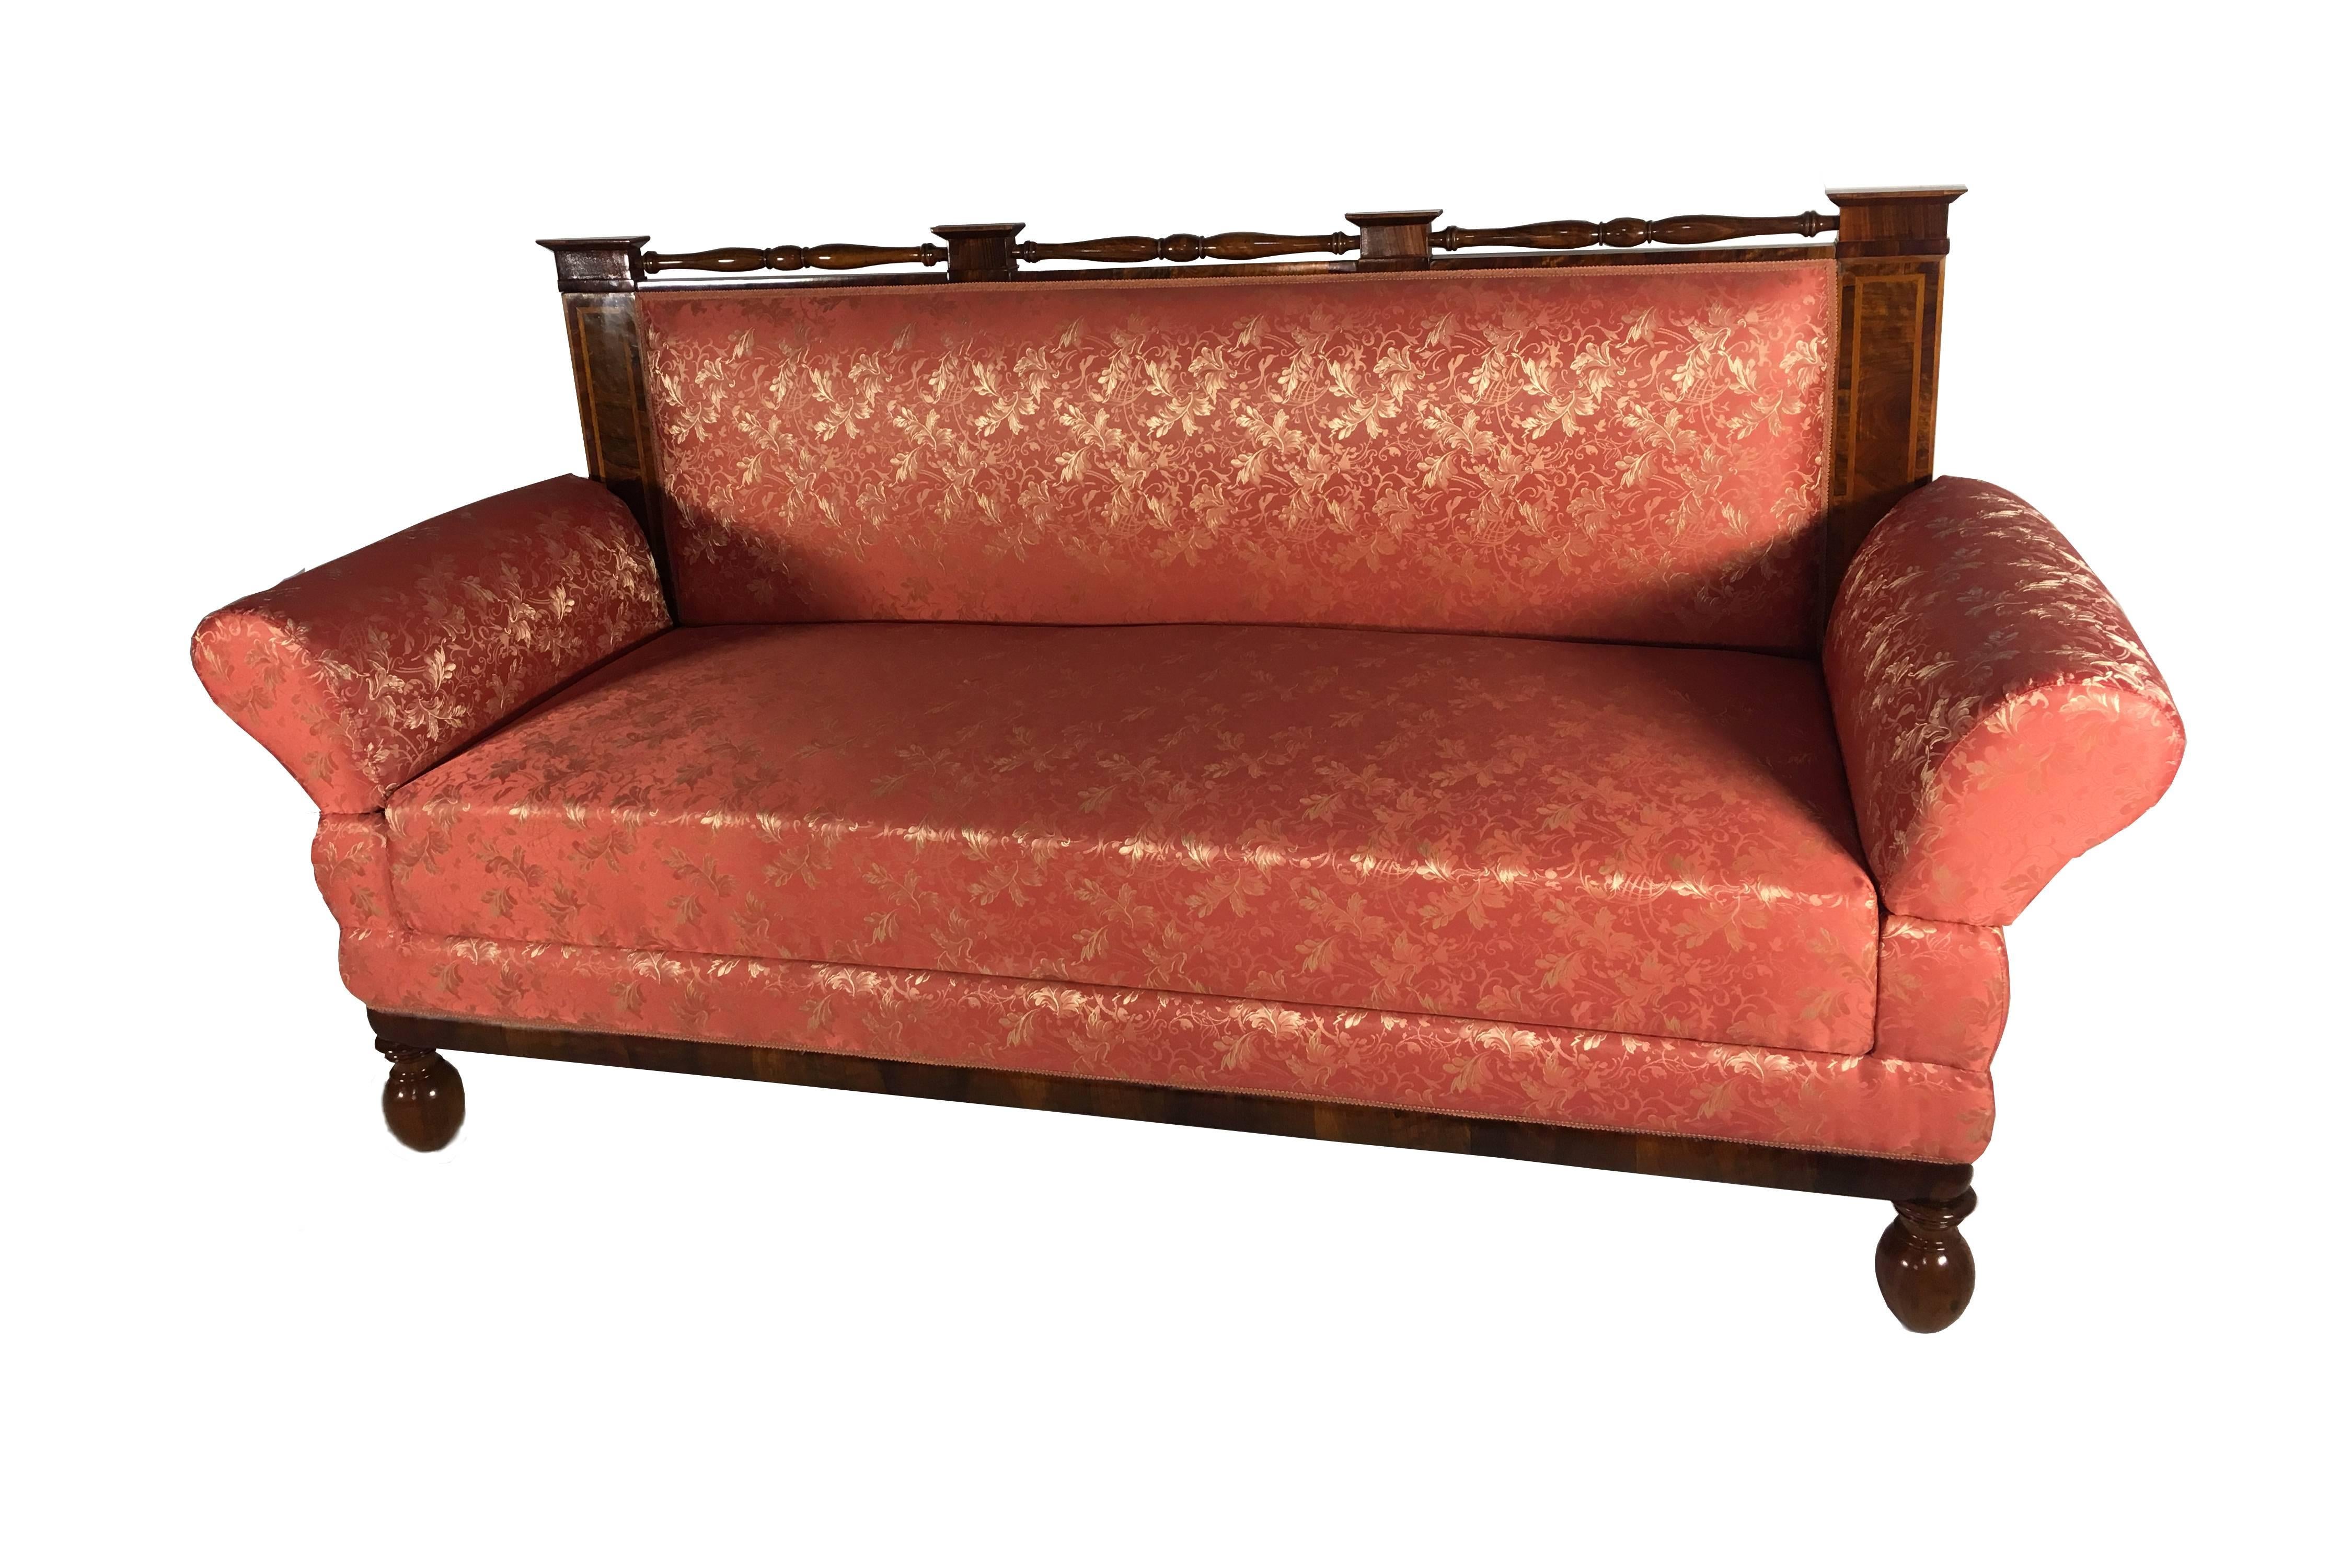 Elegant Biedermeier seating set consisting of a sofa and two armchairs. Extraordinary workmanship of the woods made according to the canons of the time. 

Measures sofa: 
Depth 75 cm, width 182 cm, height 110 cm.
 